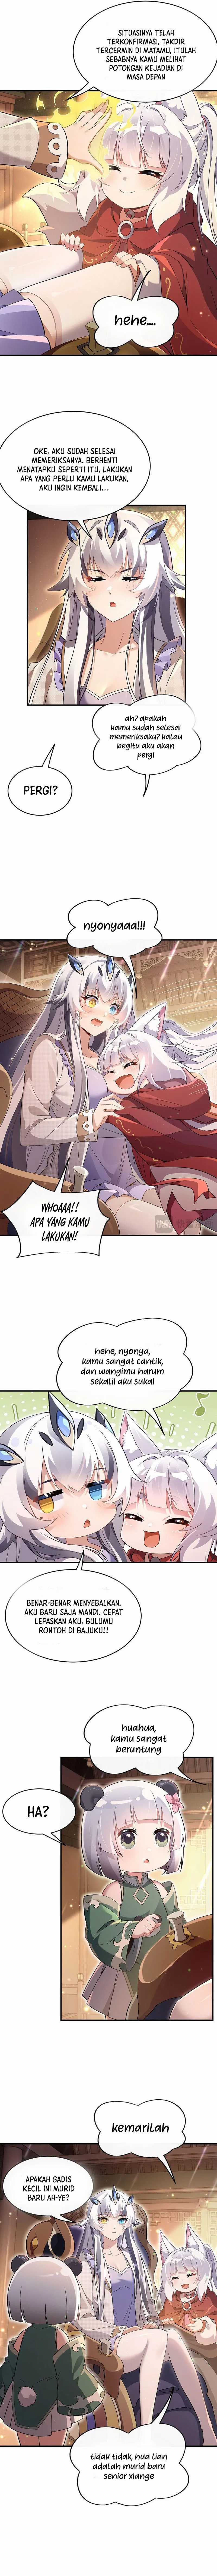 Dilarang COPAS - situs resmi www.mangacanblog.com - Komik my female apprentices are all big shots from the future 236 - chapter 236 237 Indonesia my female apprentices are all big shots from the future 236 - chapter 236 Terbaru 7|Baca Manga Komik Indonesia|Mangacan